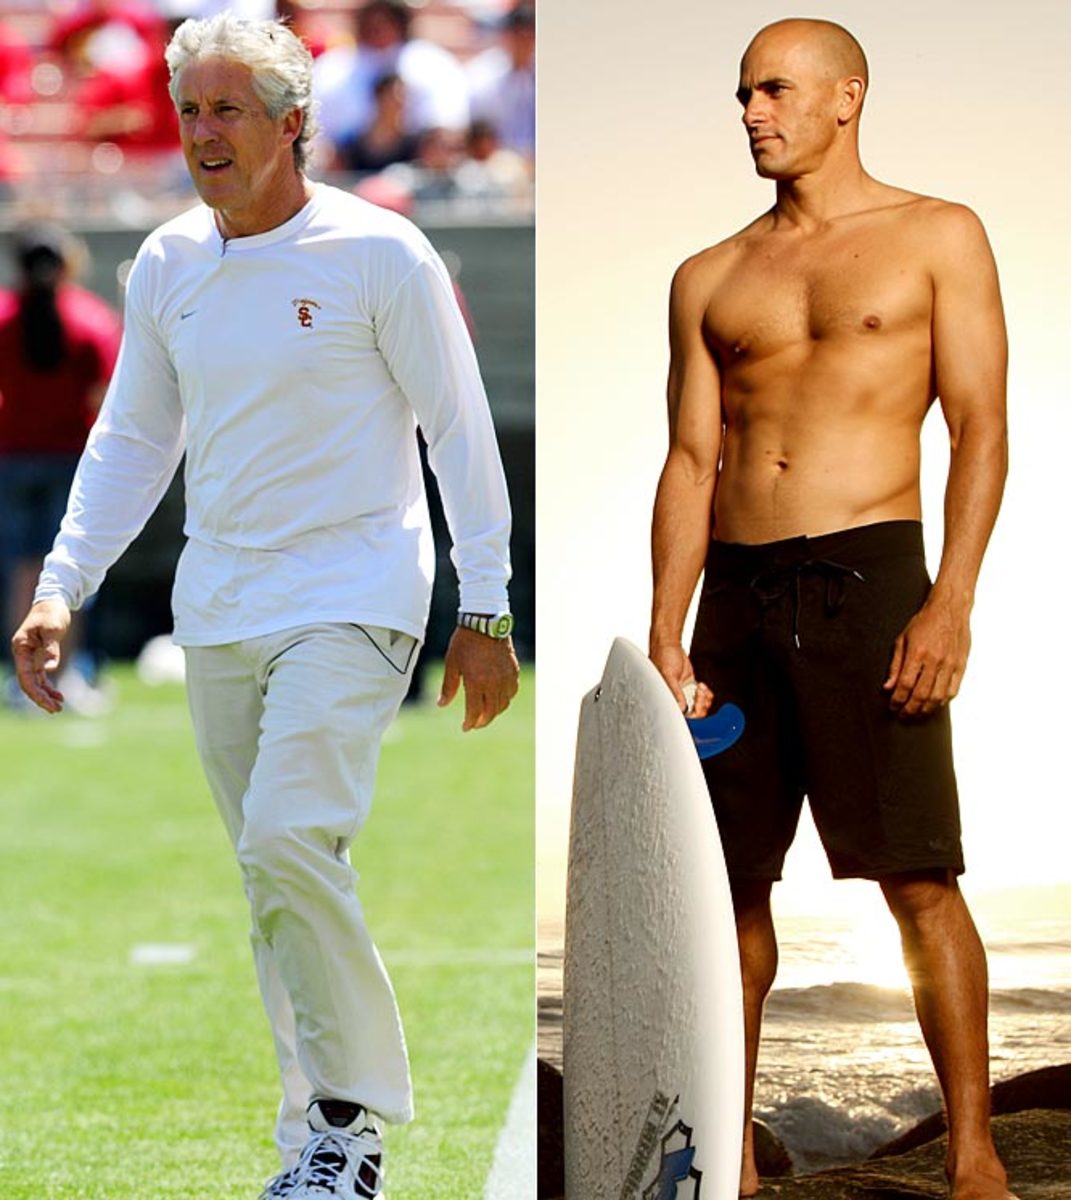 Pete Carroll and Kelly Slater